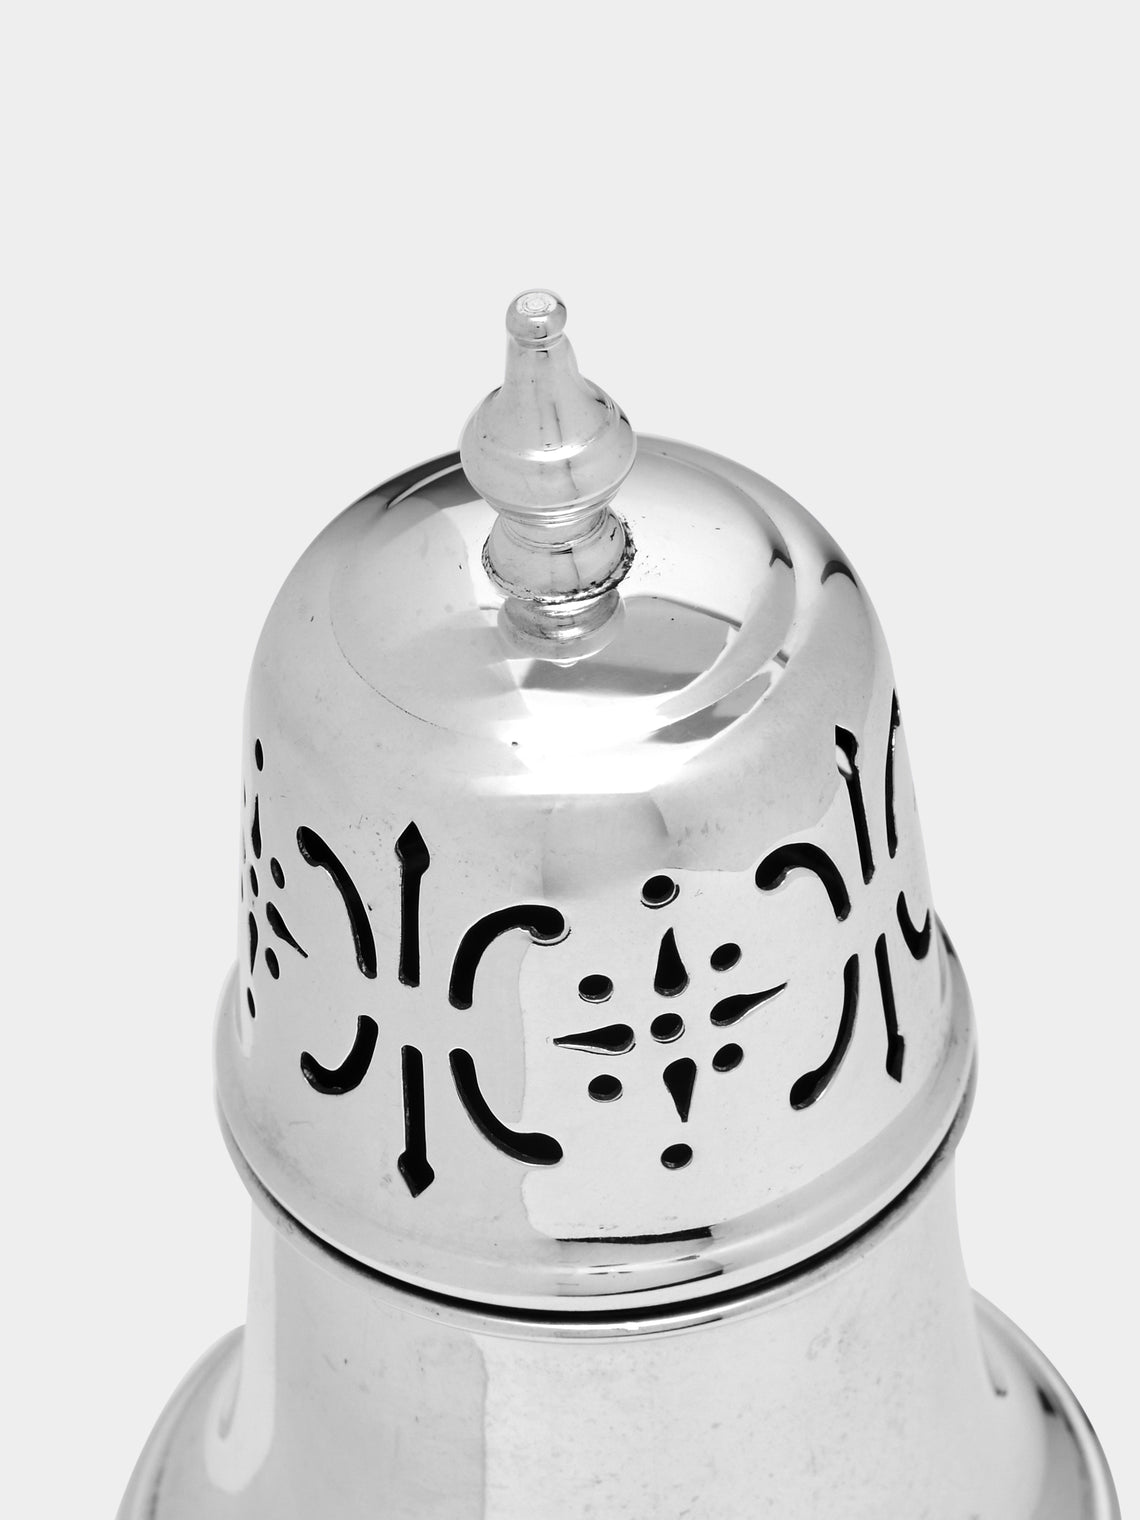 Antique and Vintage - 1900s Silver-Plated Sugar Shaker -  - ABASK